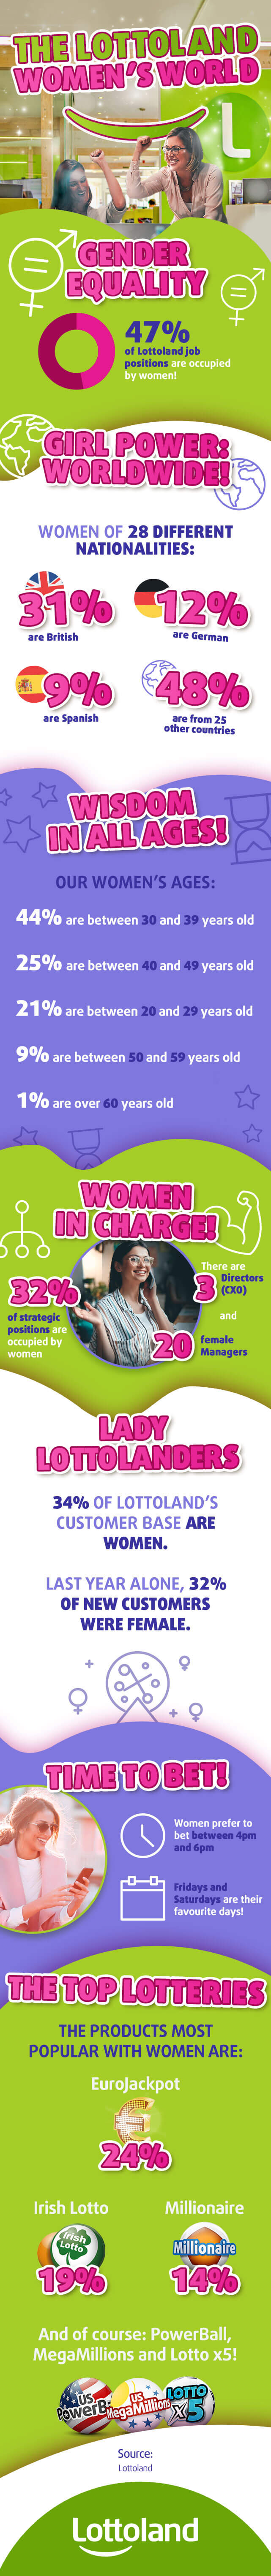 Infographic showing facts about women at Lottoland for International Women's Day